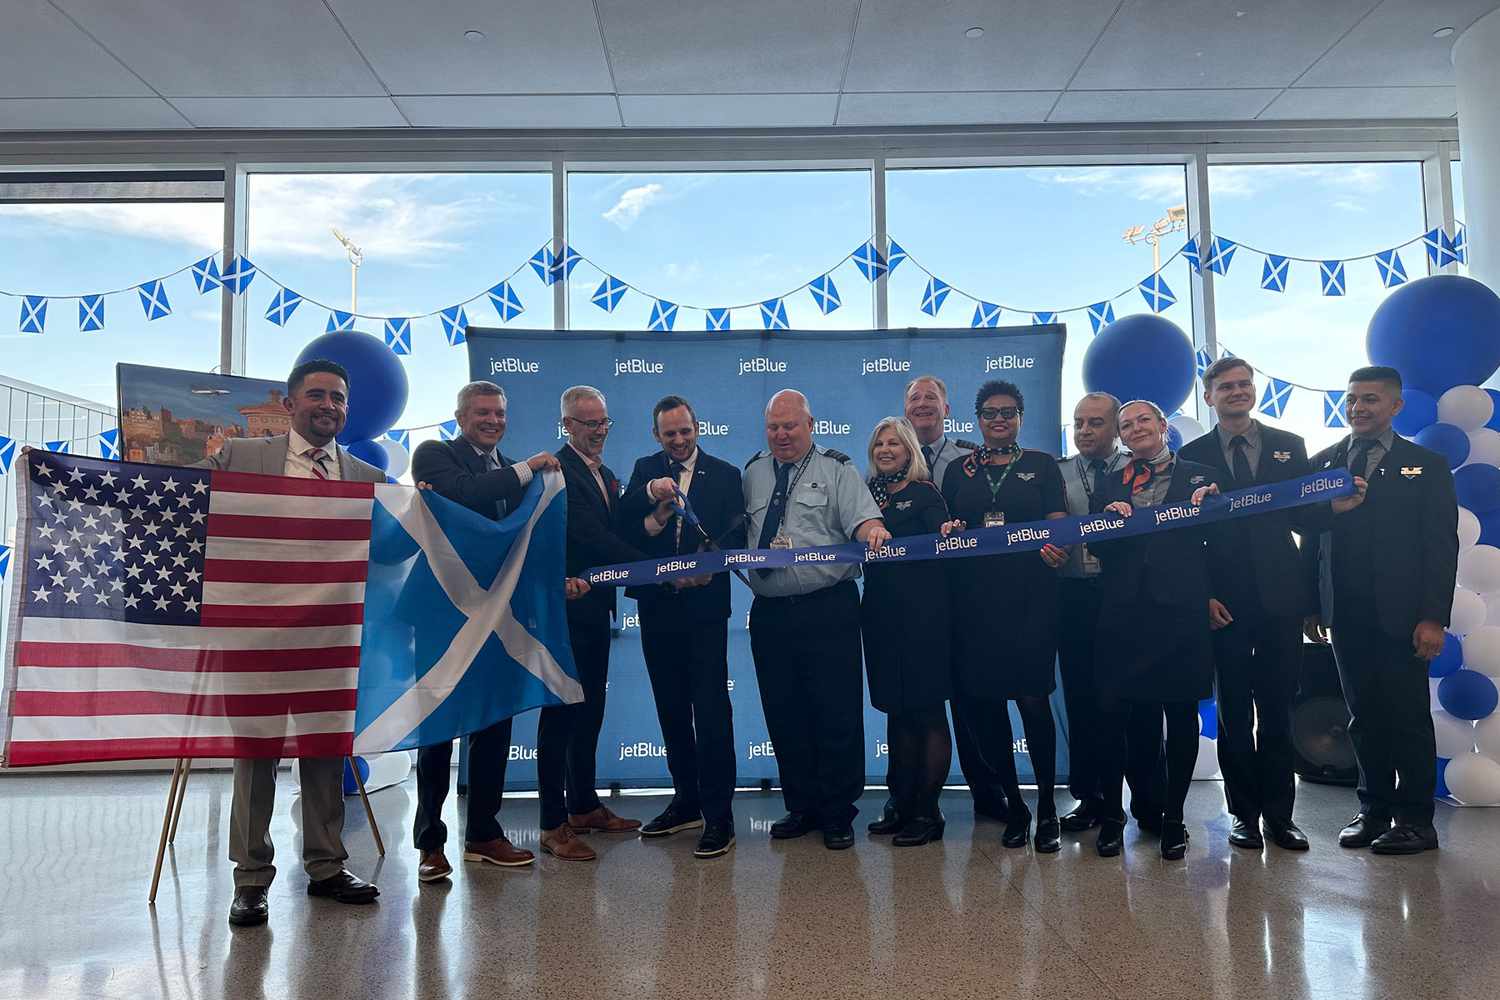 I Just Arrived in Edinburgh on JetBlue's First Flight to Scotland — Here's What to Expect on the New Route